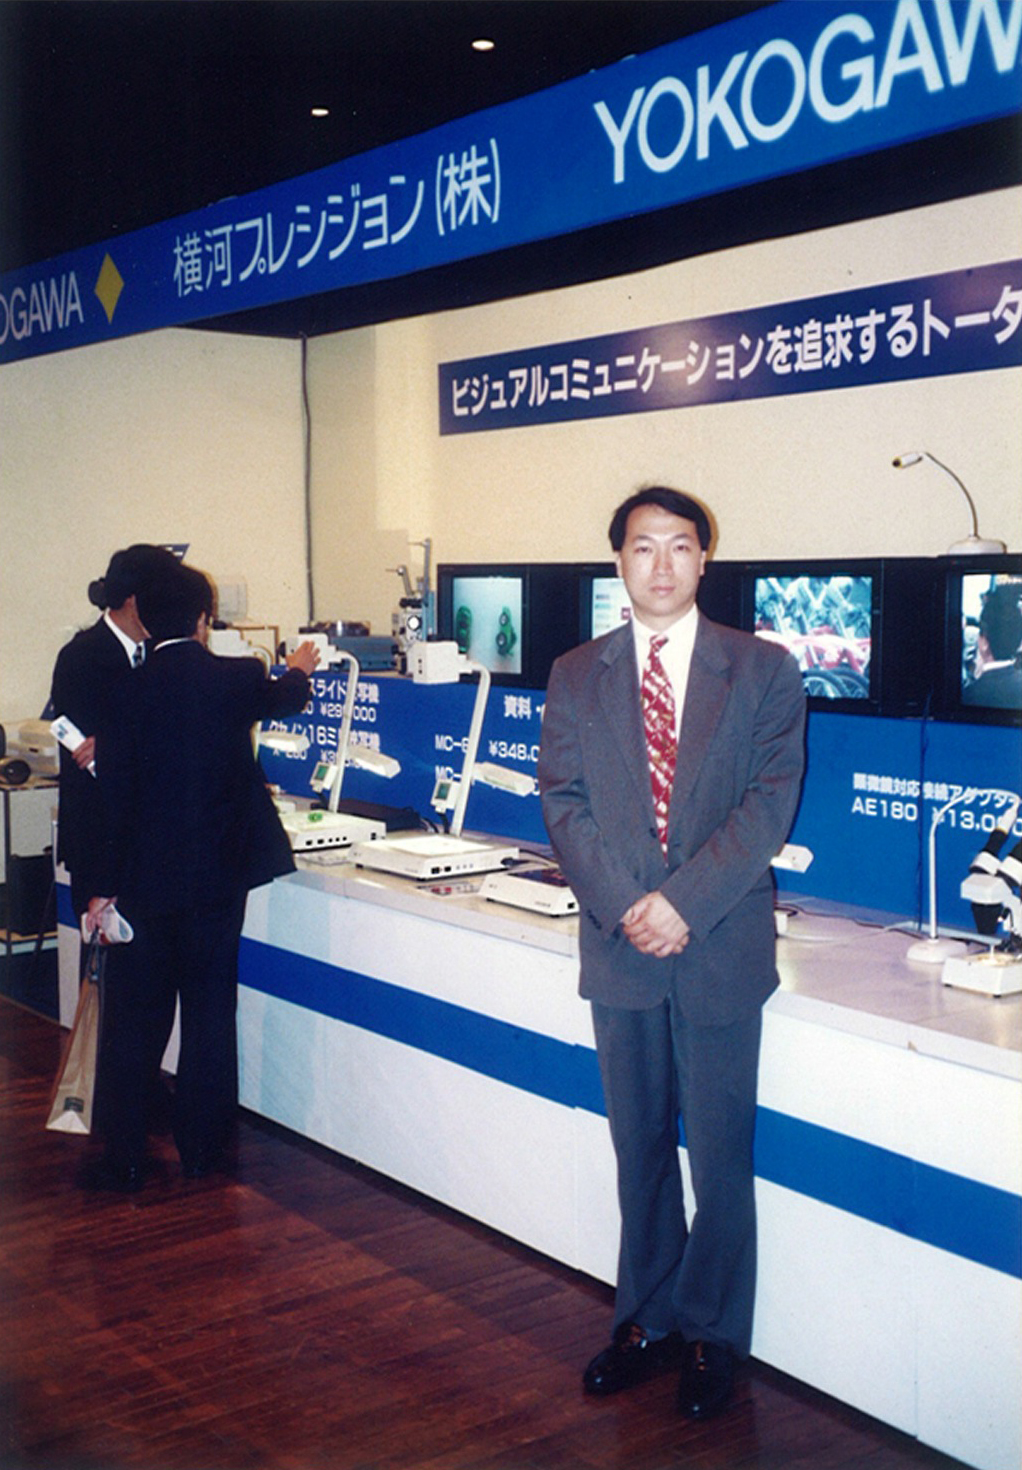 Cosmo’s founder, Philip Yeung  Chi Ho situated in Yokogawa’s booth